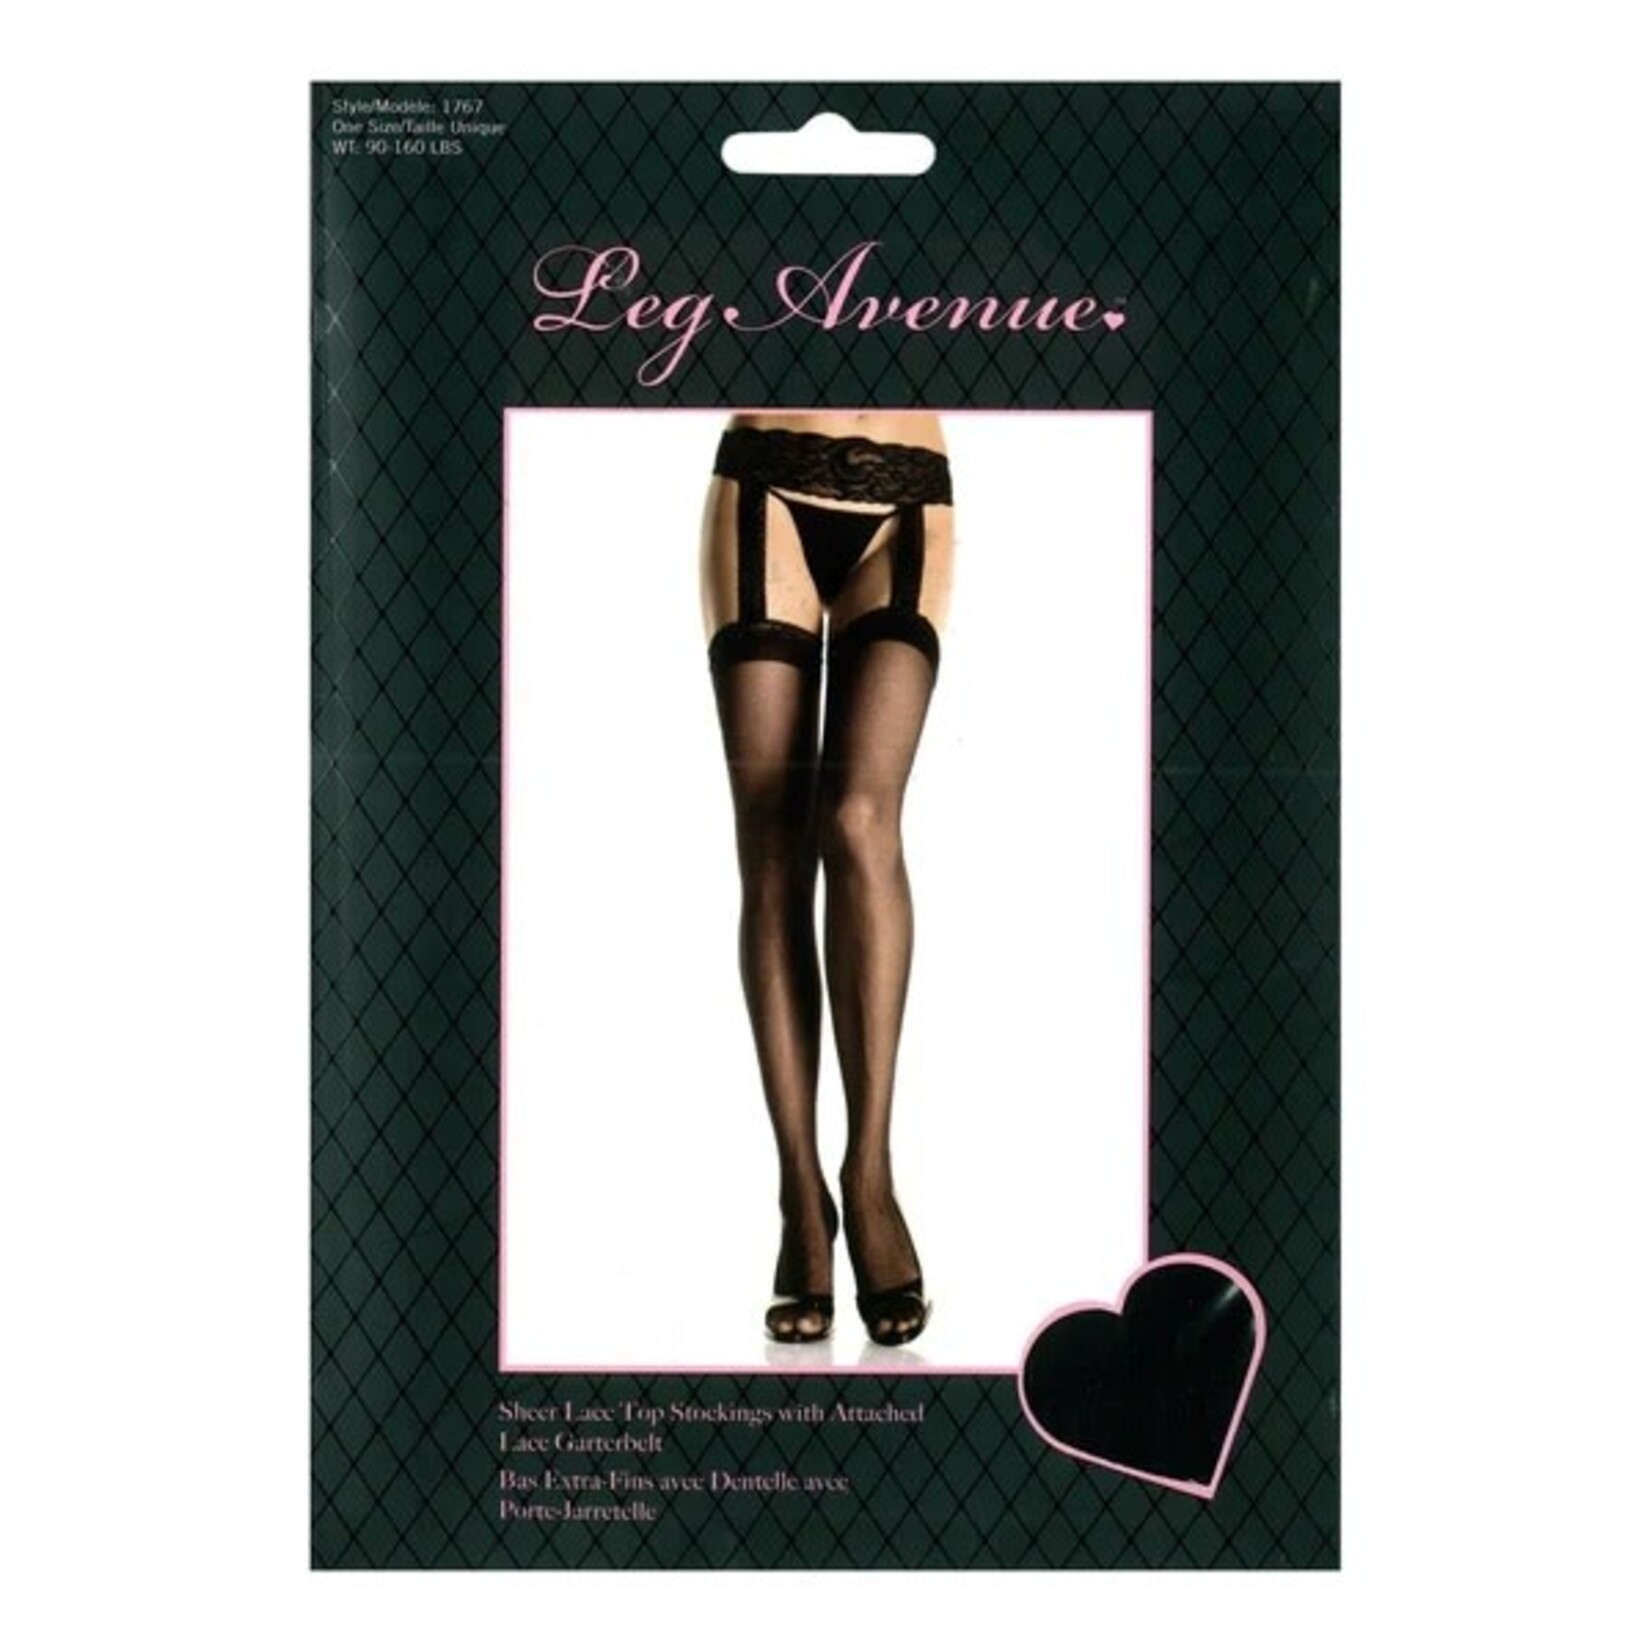 LEG AVENUE LEG AVENUE SHEER LACE TOP STOCKINGS WITH ATTACHED LACE GARTERBELT - BLACK - ONE SIZE